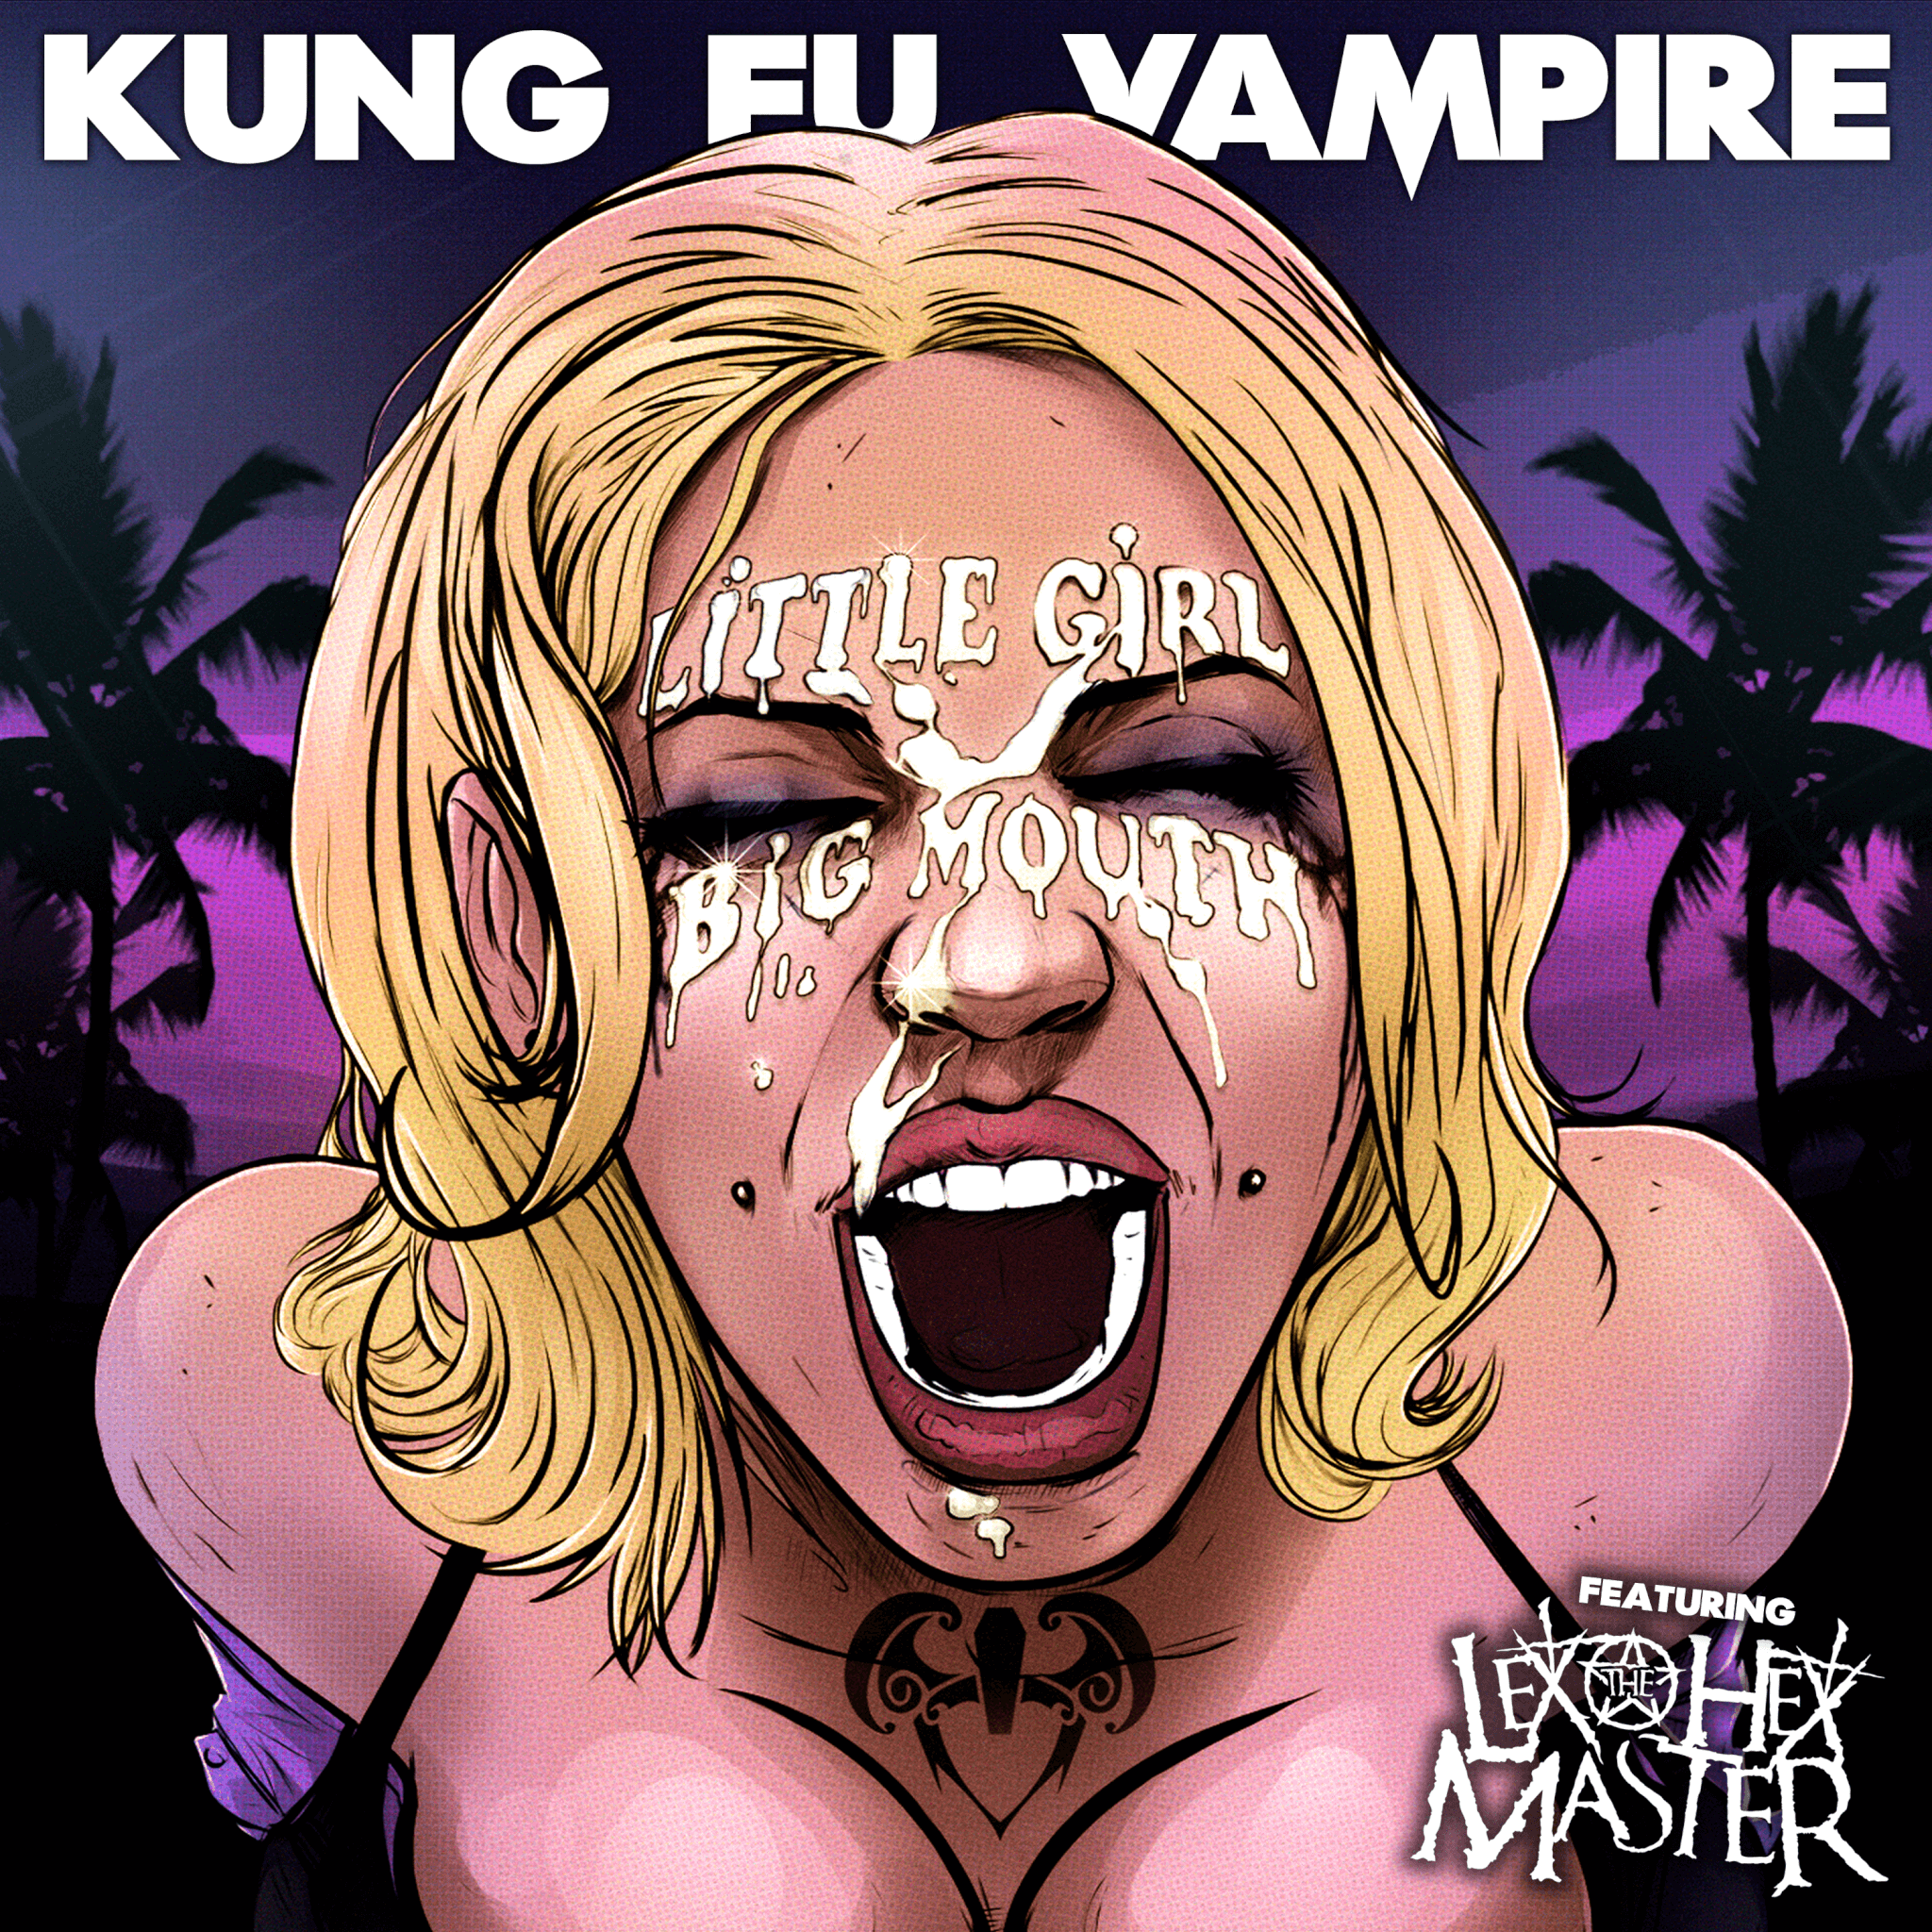 Kung Fu Vampire releases NEW SINGLE